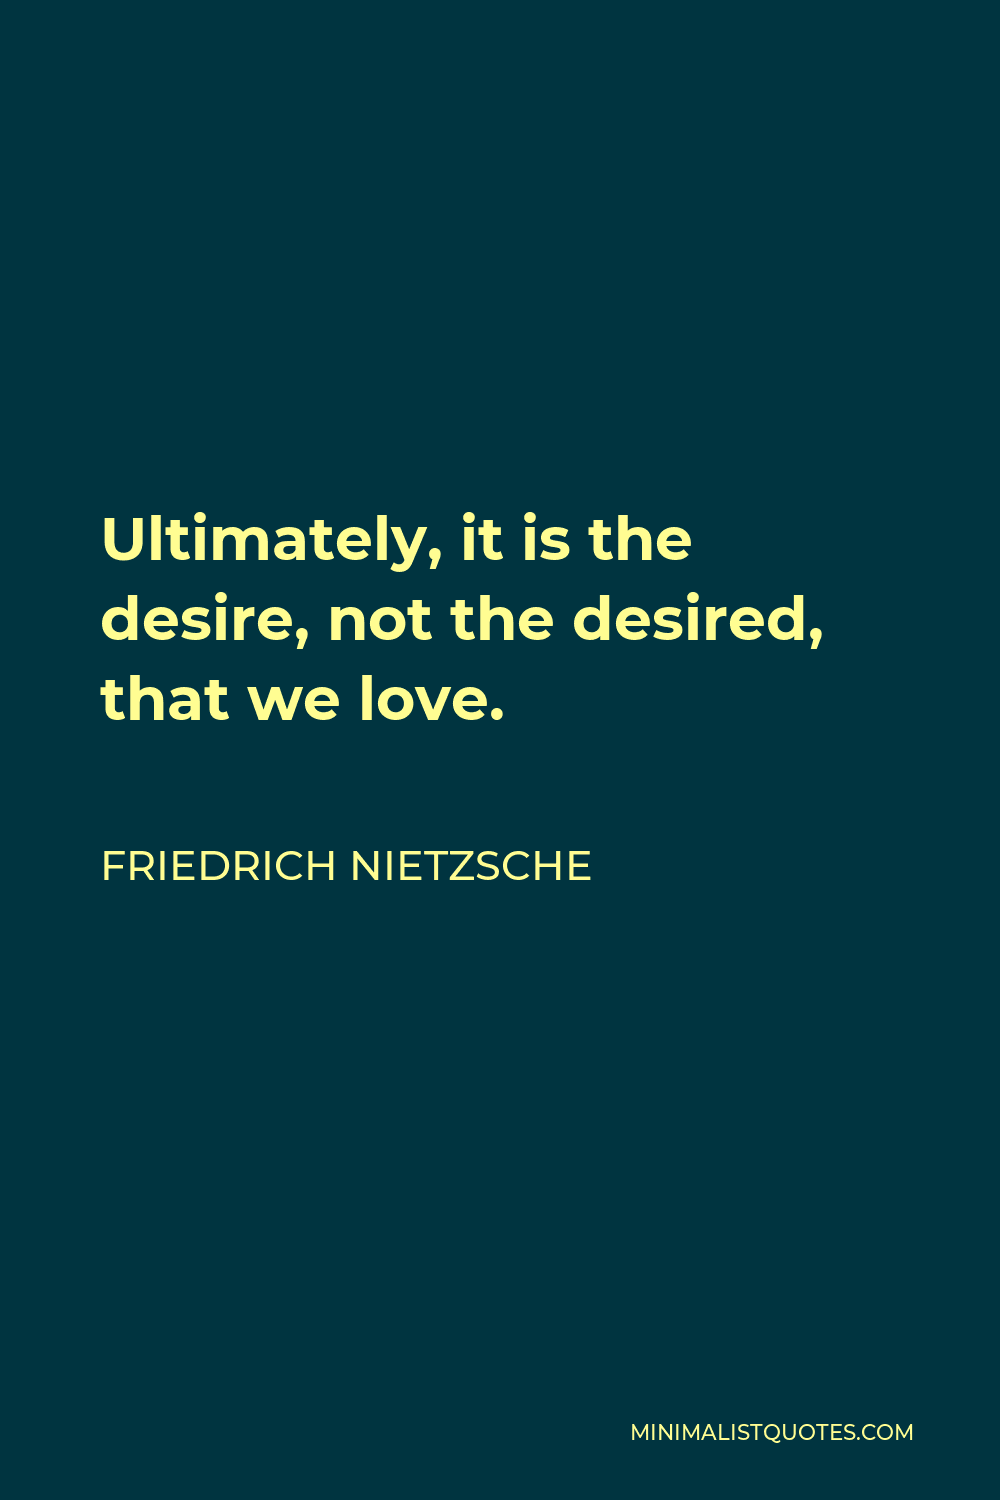 Friedrich Nietzsche Quote - Ultimately, it is the desire, not the desired, that we love.